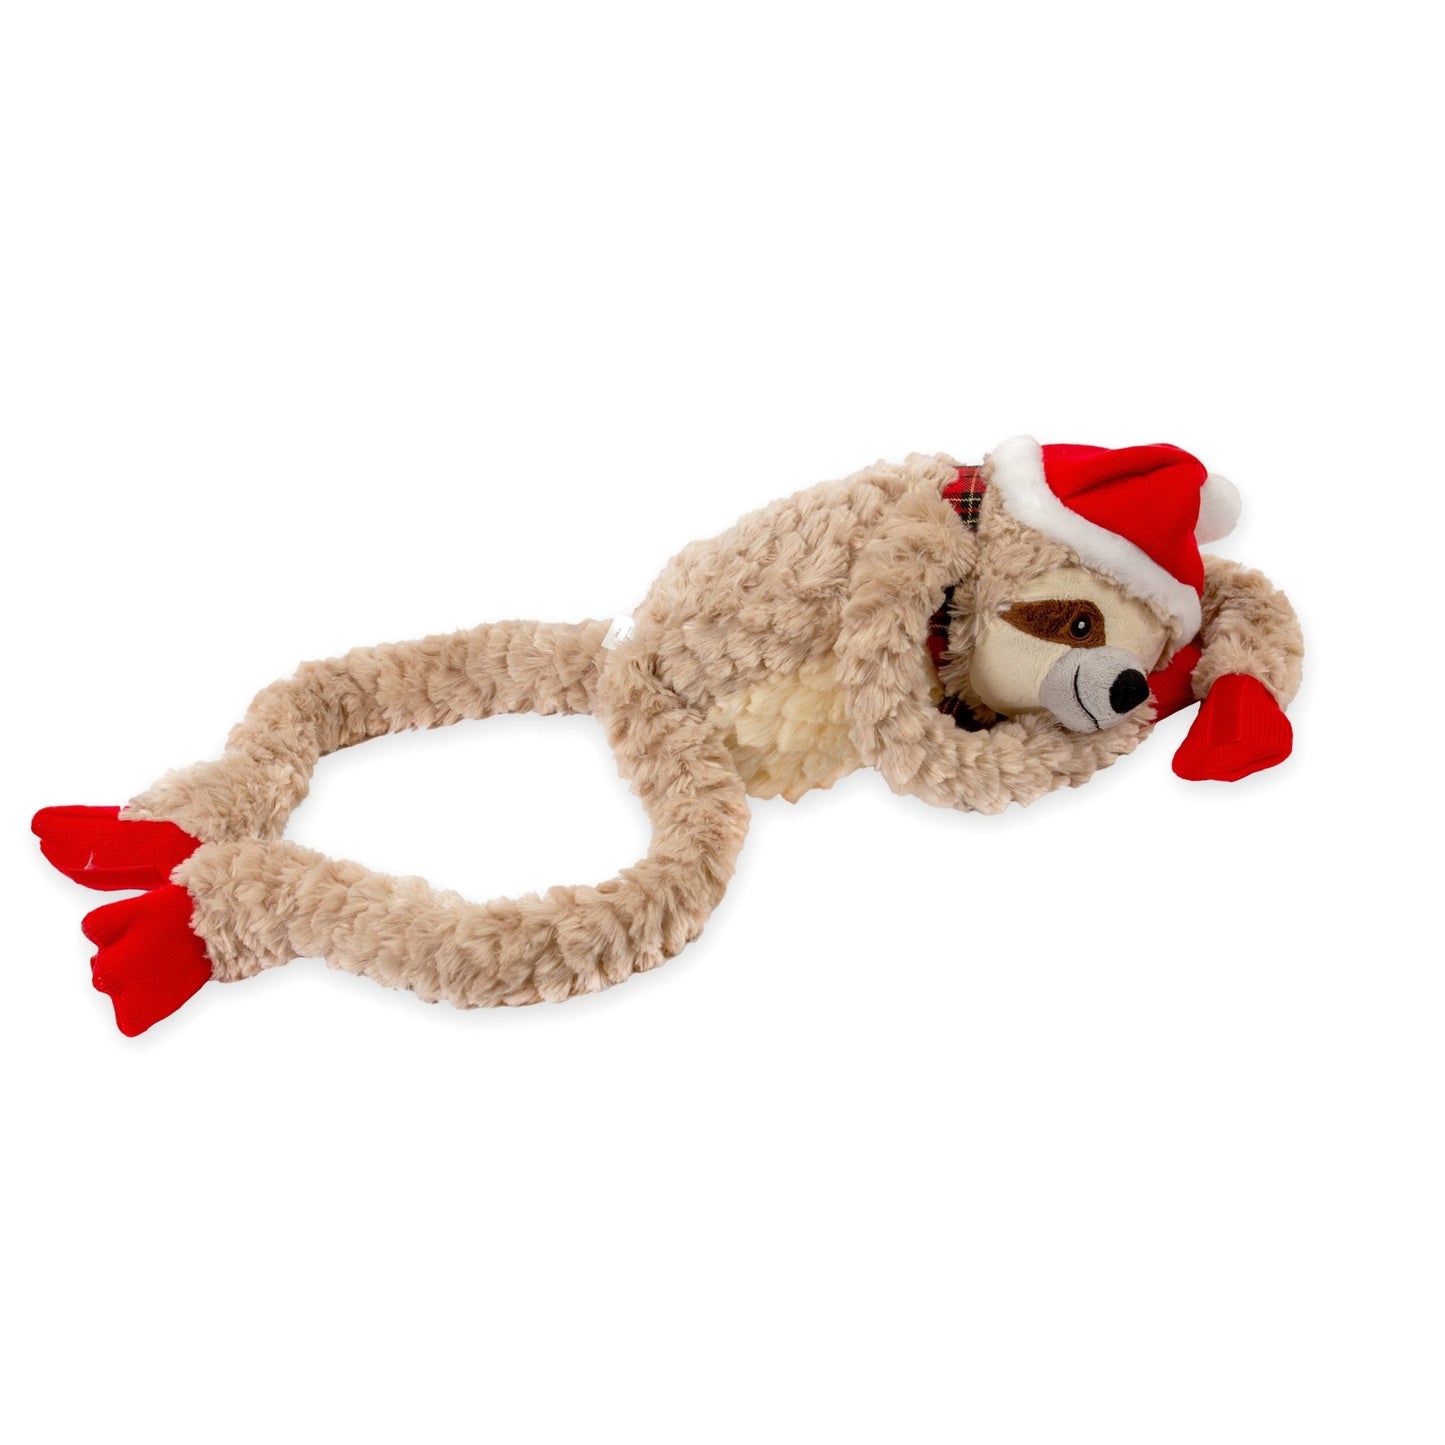 Pier 1 Scully The Sloth 32" Plush - Pier 1